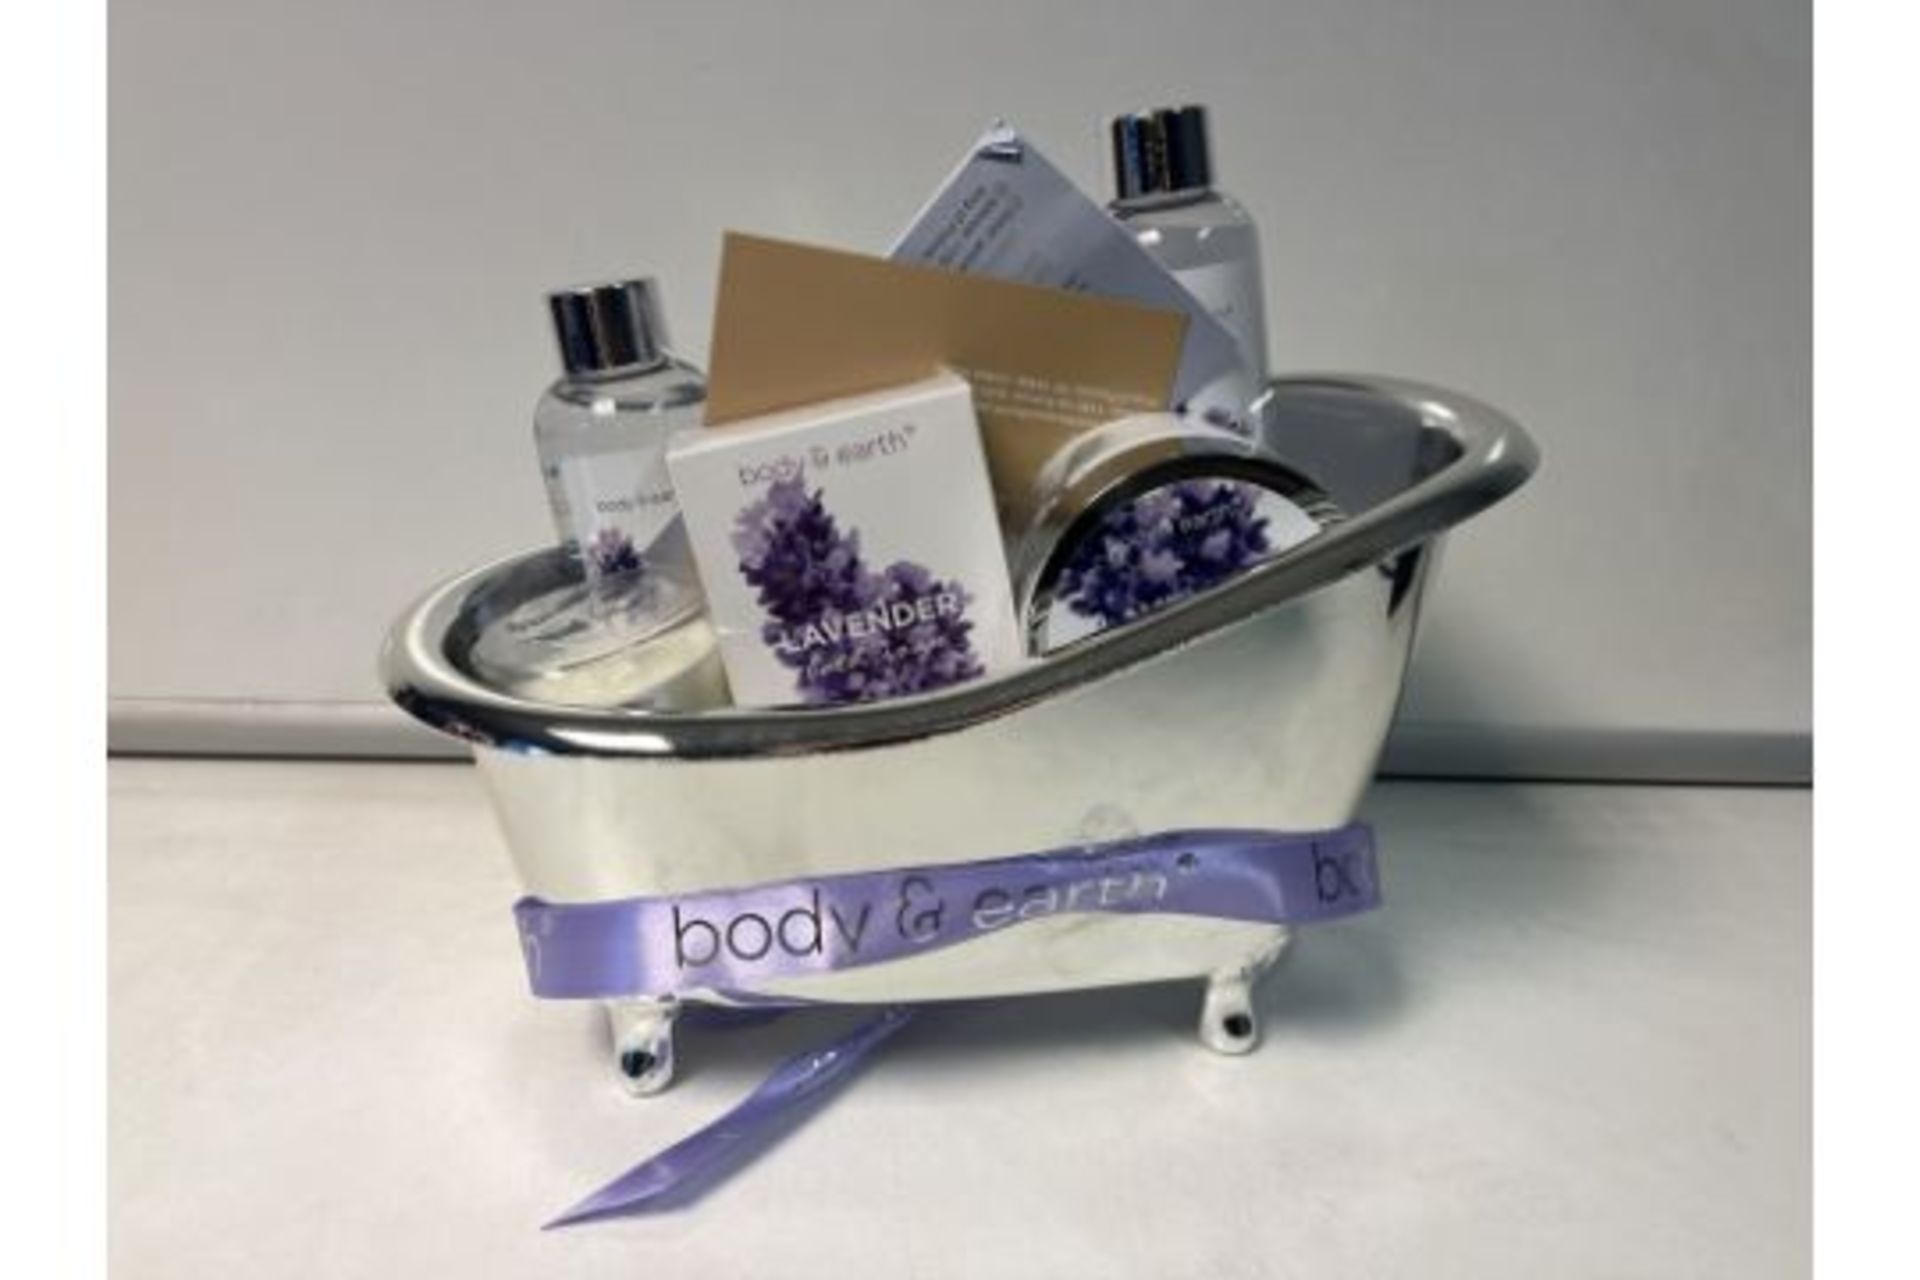 12 X BRAND NEW LUXURY BATH AND BODY 6 PIECE LAVENDER BODY AND EARTH SPA SETS IN BATH RRP £30 EACH